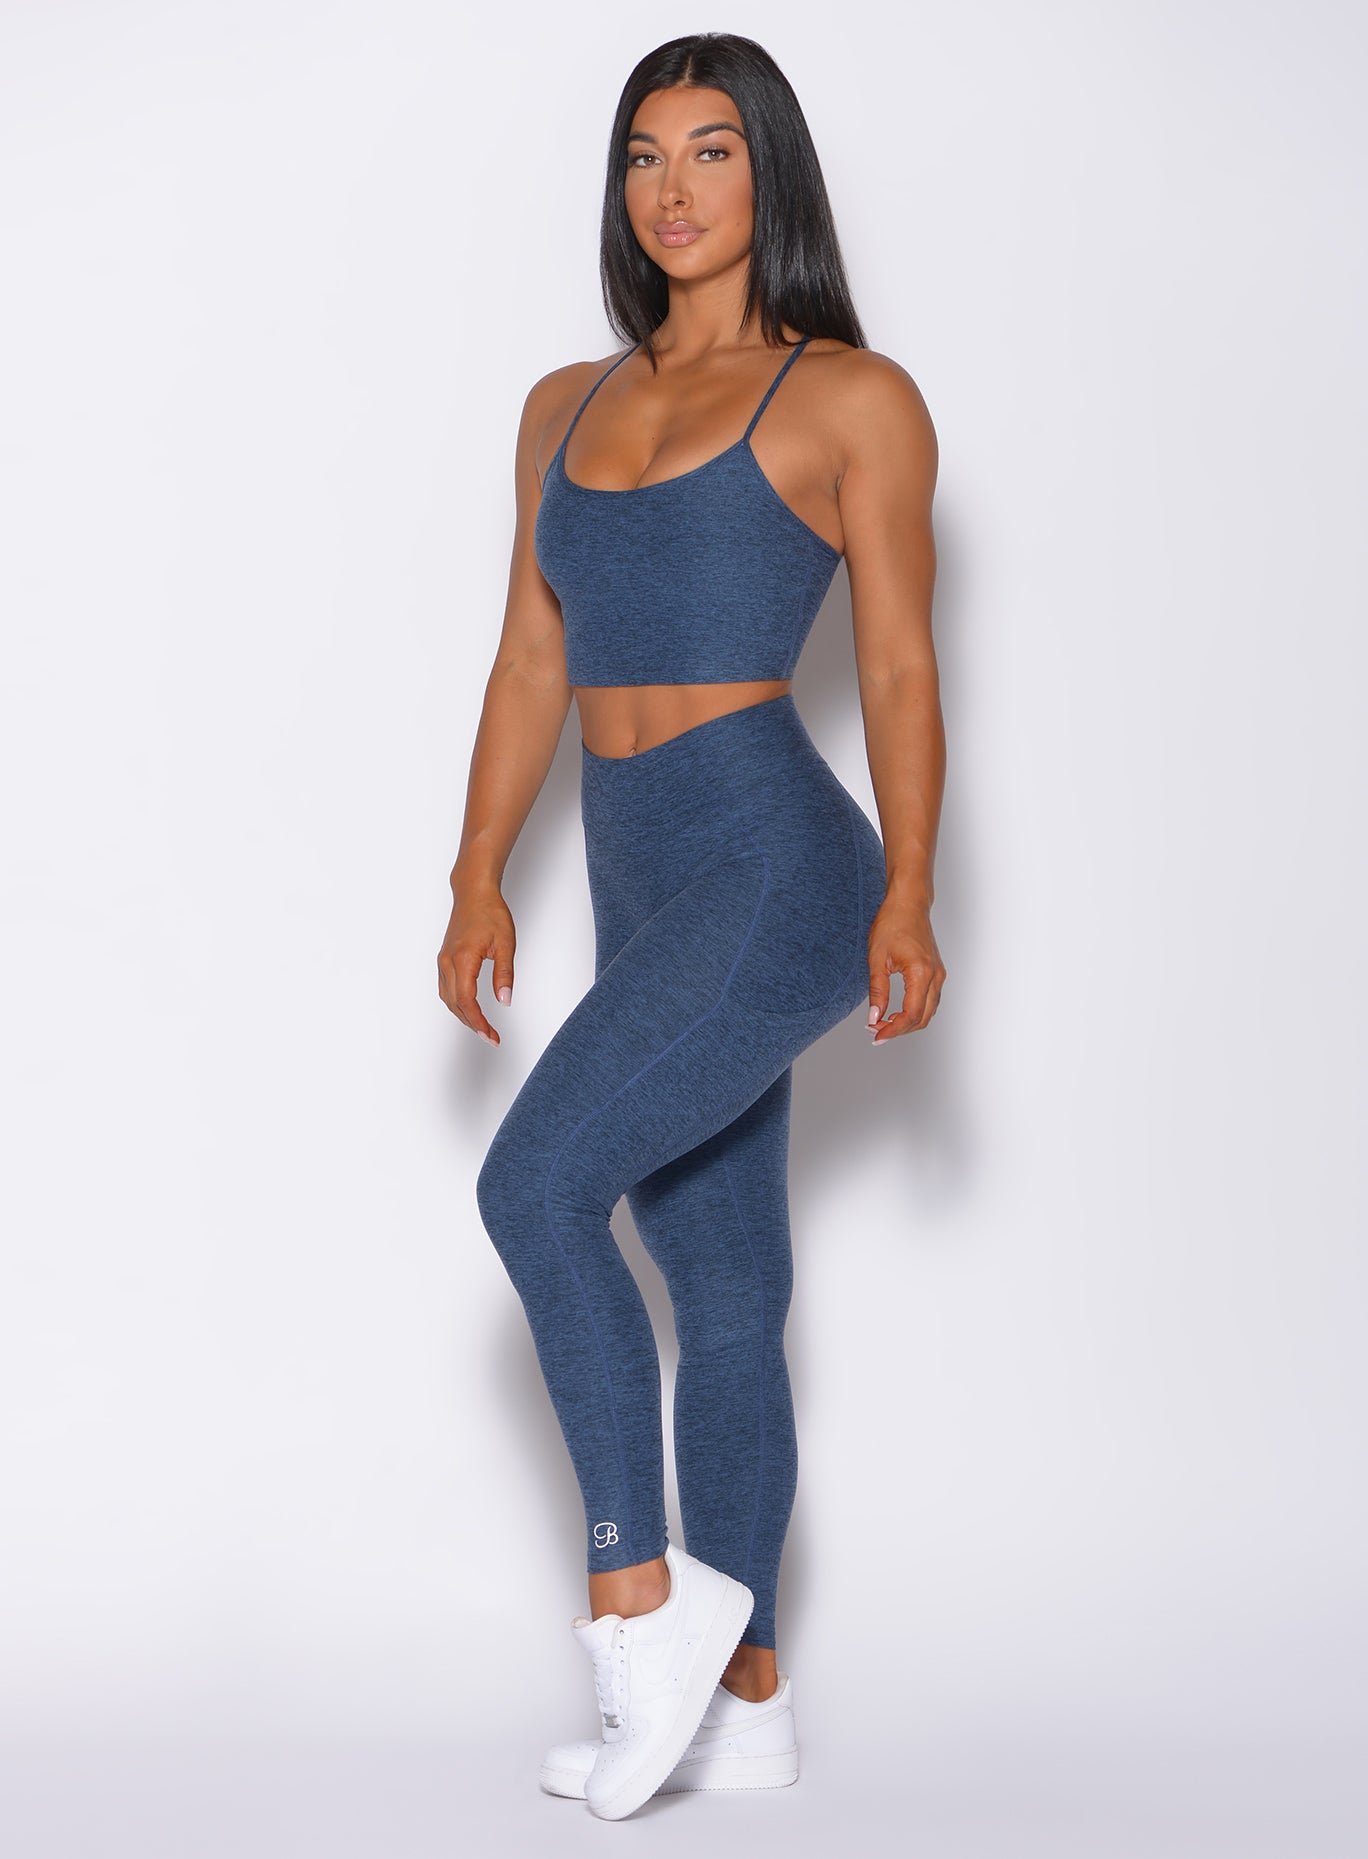 Lace-Up Back Sports Bra and Butt Lift Leggings Set in Black - Retro, Indie  and Unique Fashion